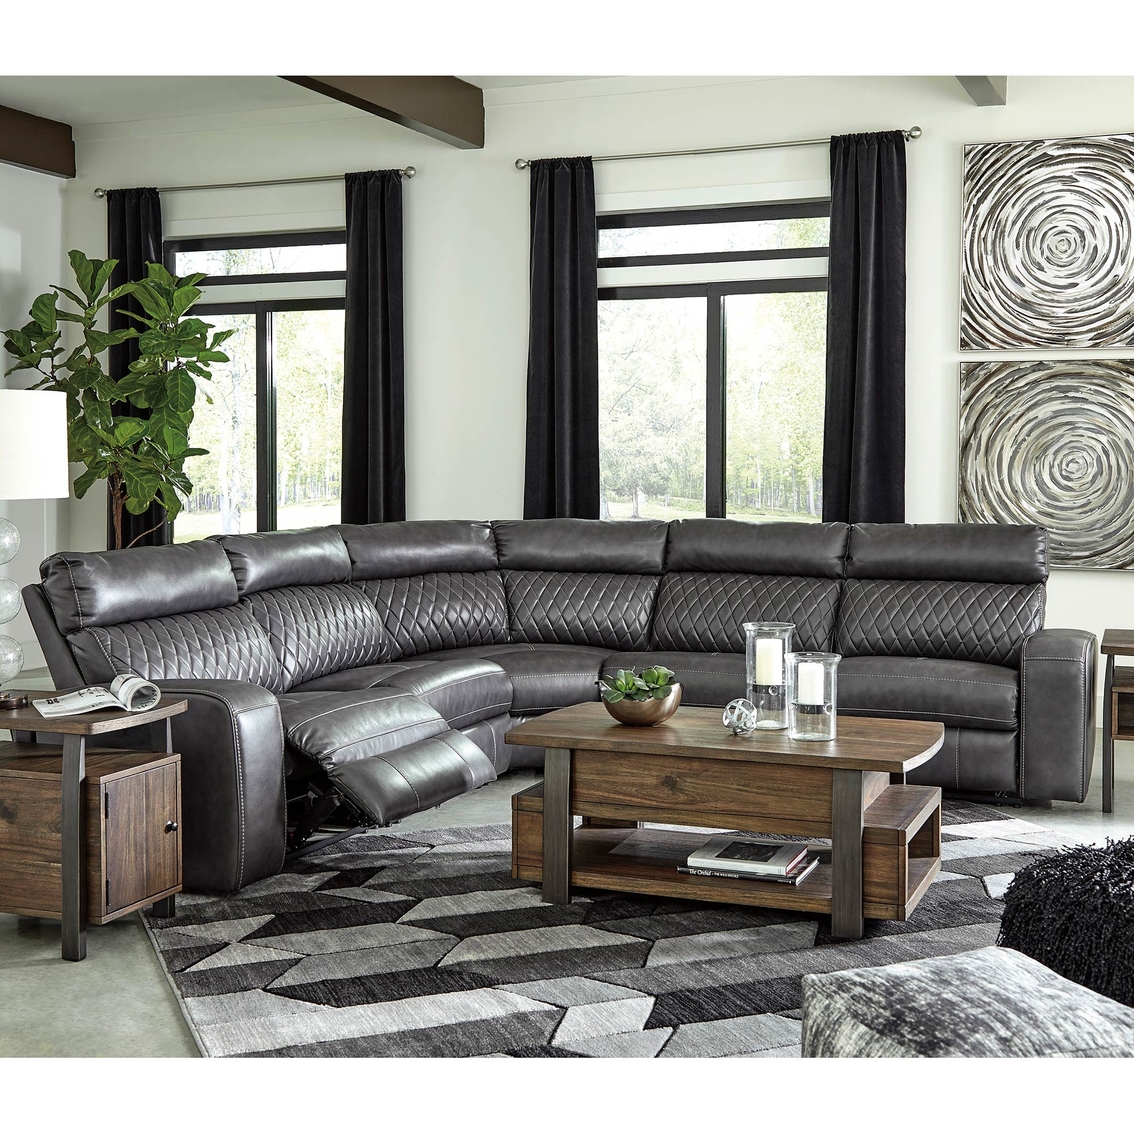 Signature Design by Ashley Samperstone 5 pc. Sectional with 3 Reclining Seats - Image 3 of 4